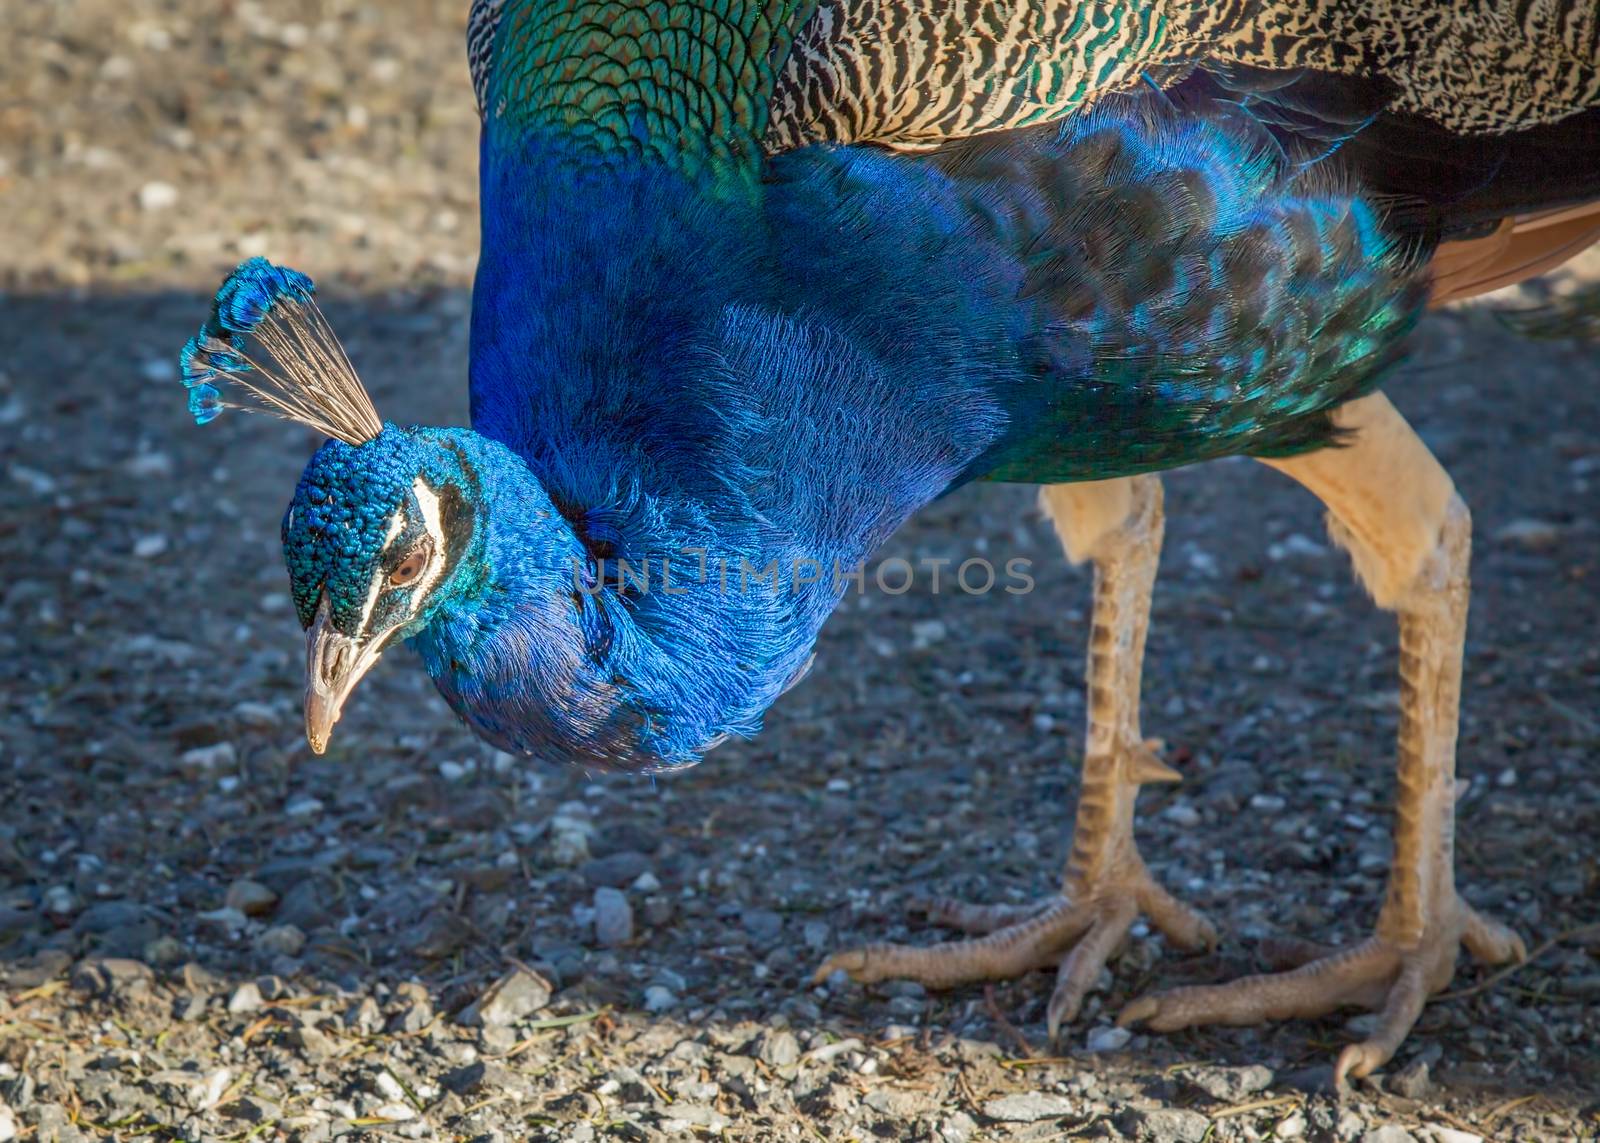 Peacock Eating Lunch by backyard_photography